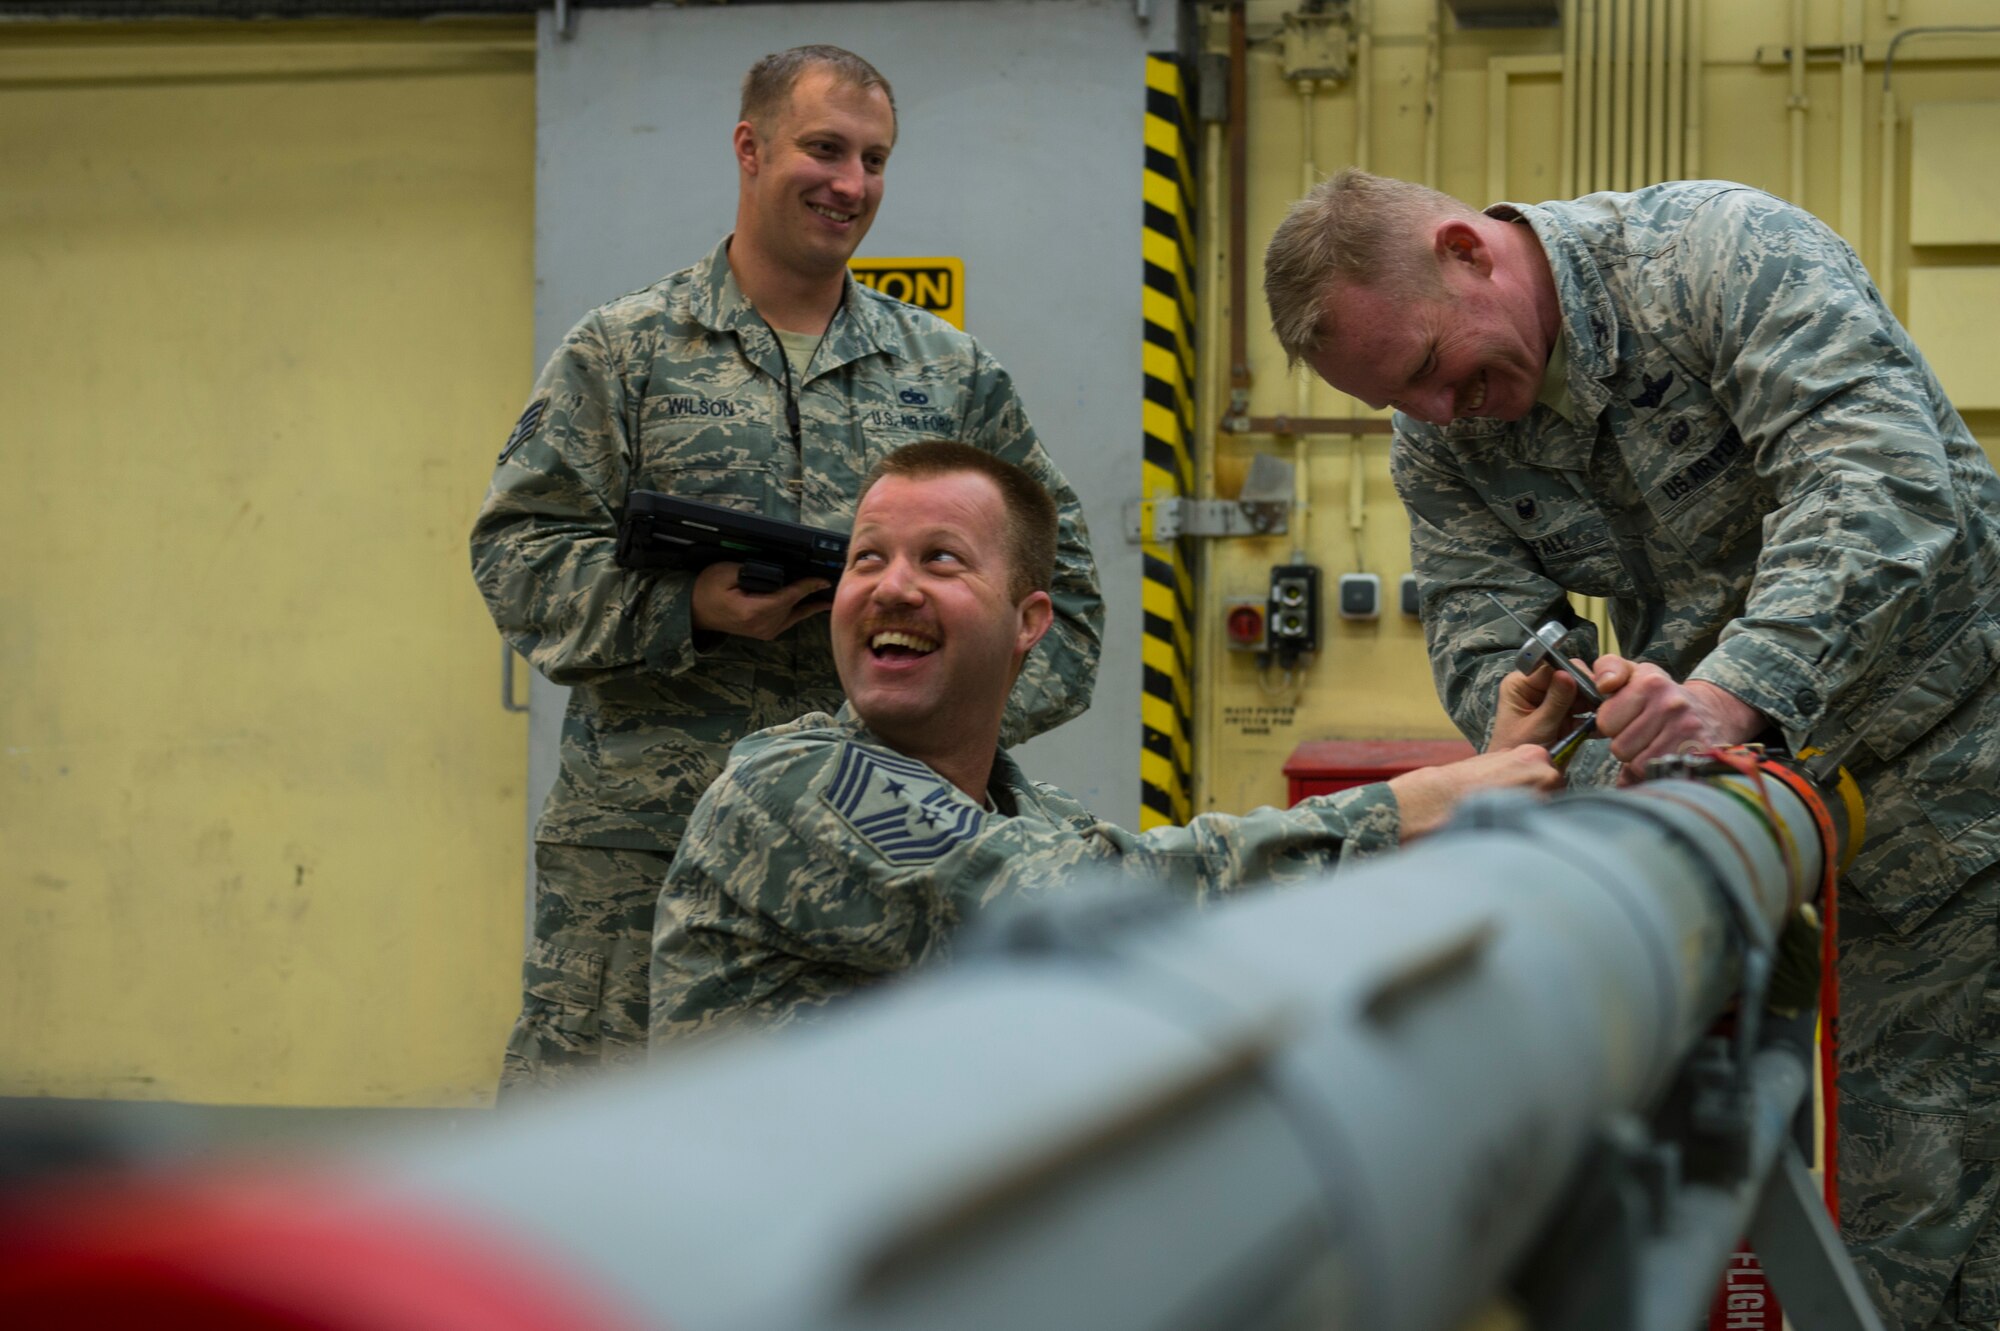 U.S. Air Force Chief Master Sgt. Edwin Ludwigsen 52nd Fighter Wing command chief and Col. Joseph McFall, 52nd FW commander, secure attachments to an Air Intercept Missile 9 at Spangdahlem Air Base, Germany, March 27, 2017. Airmen from the 52nd Maintenance Squadron munitions section work around the clock to support day-to-day flying.(U.S. Air Force photo by Senior Airman Dawn M. Weber)